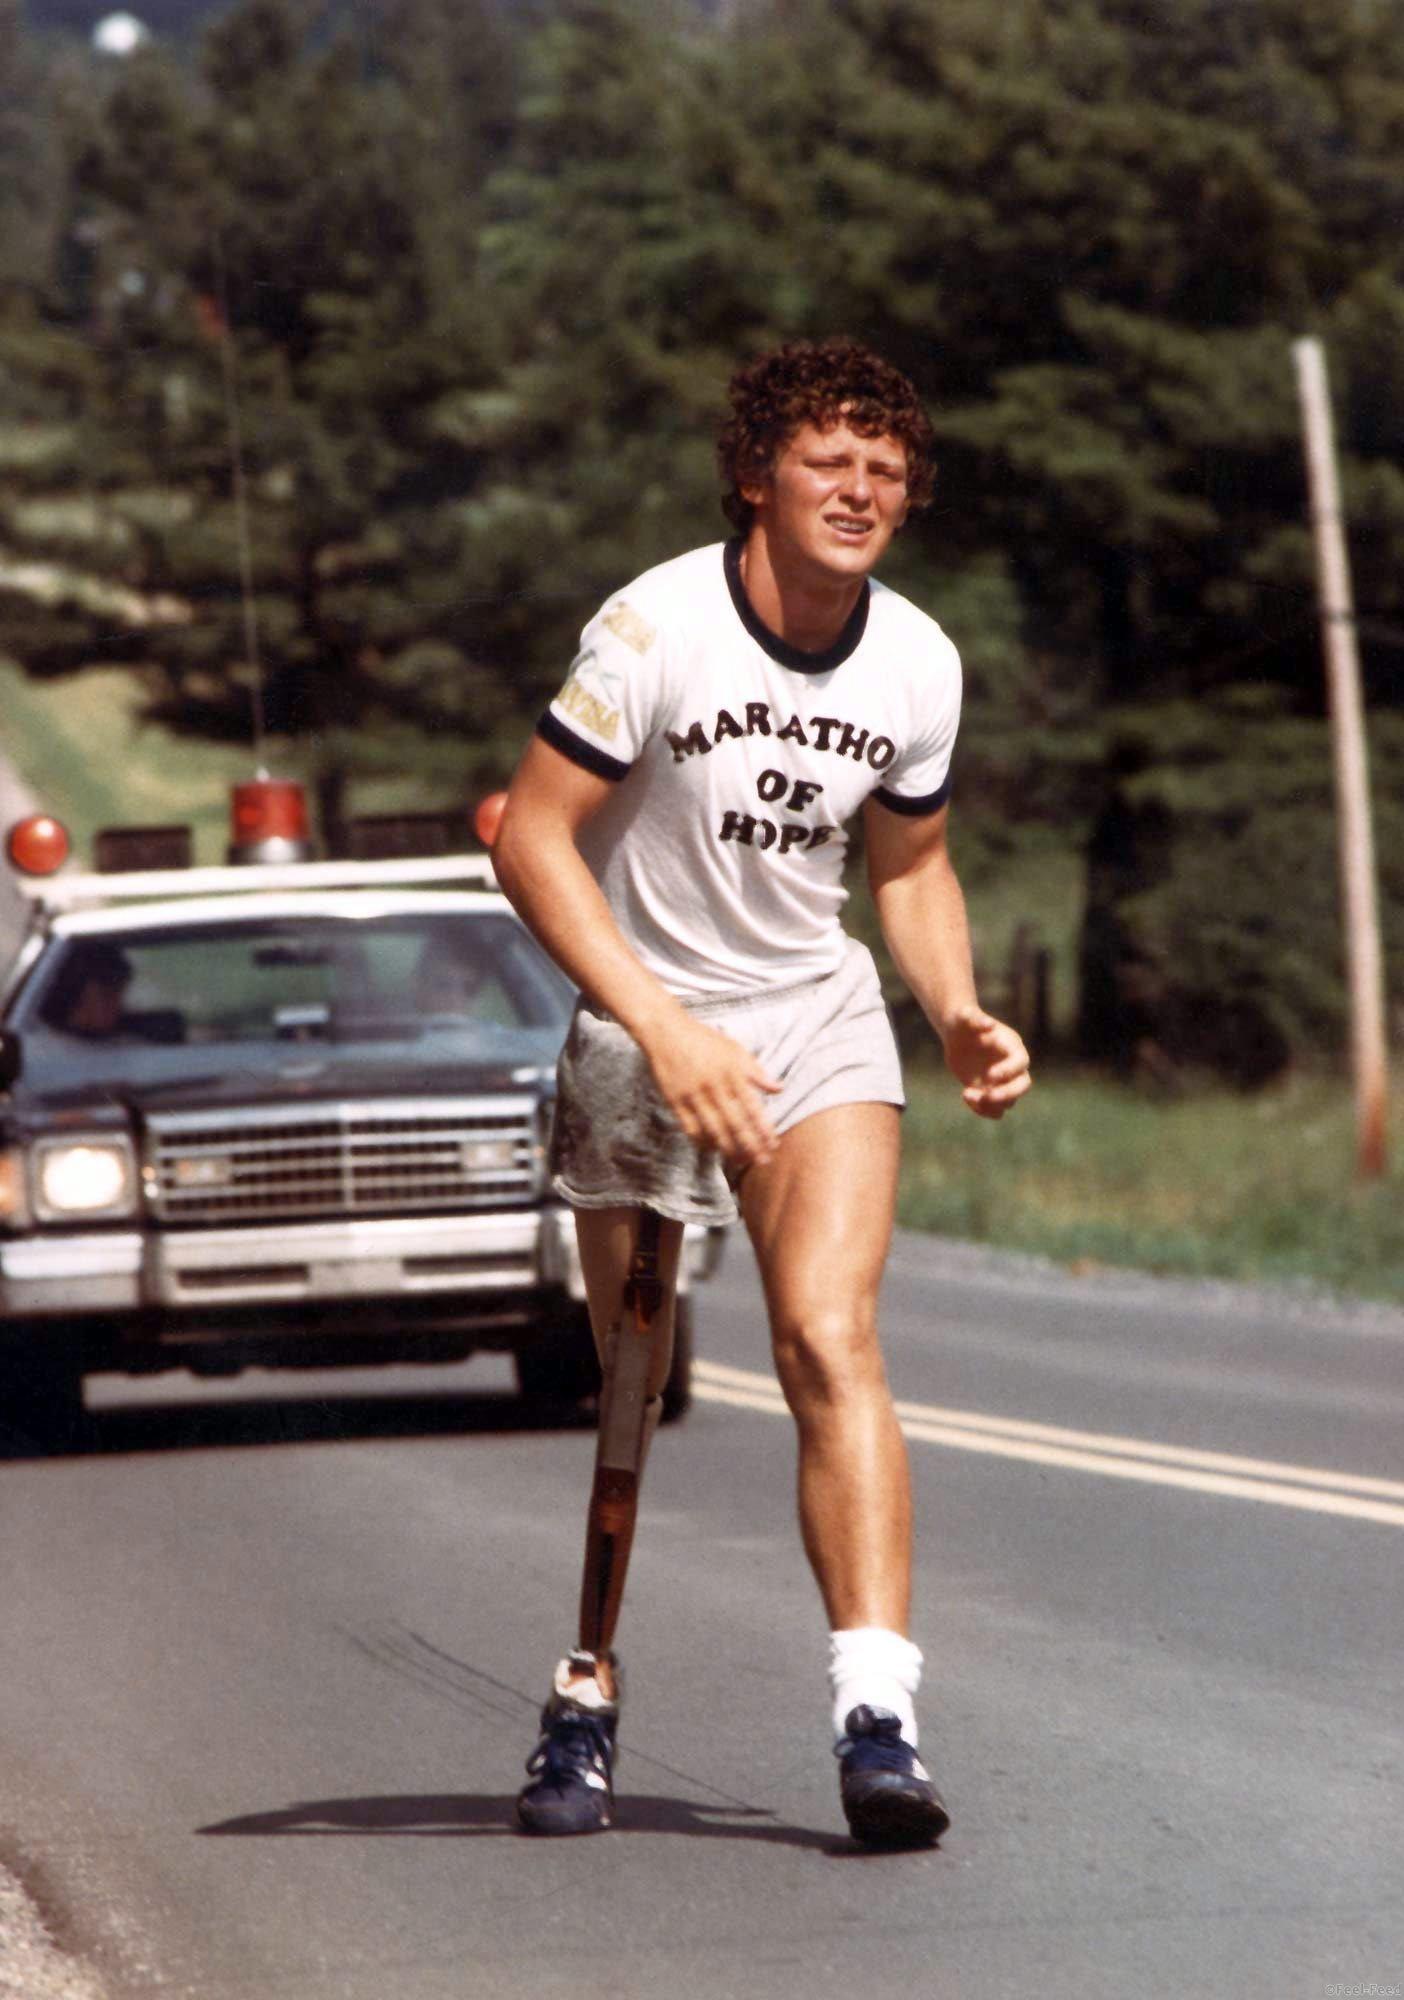 (CPT101)--TERRY FOX-- Marathon of Hope runner, Terry Fox, shown in this undated photo, had his dream of running across the country cut short near Thunder Bay, Ont., when he learned that cancer had spread to his lungs. (CP PHOTO) 1981 (Stf)